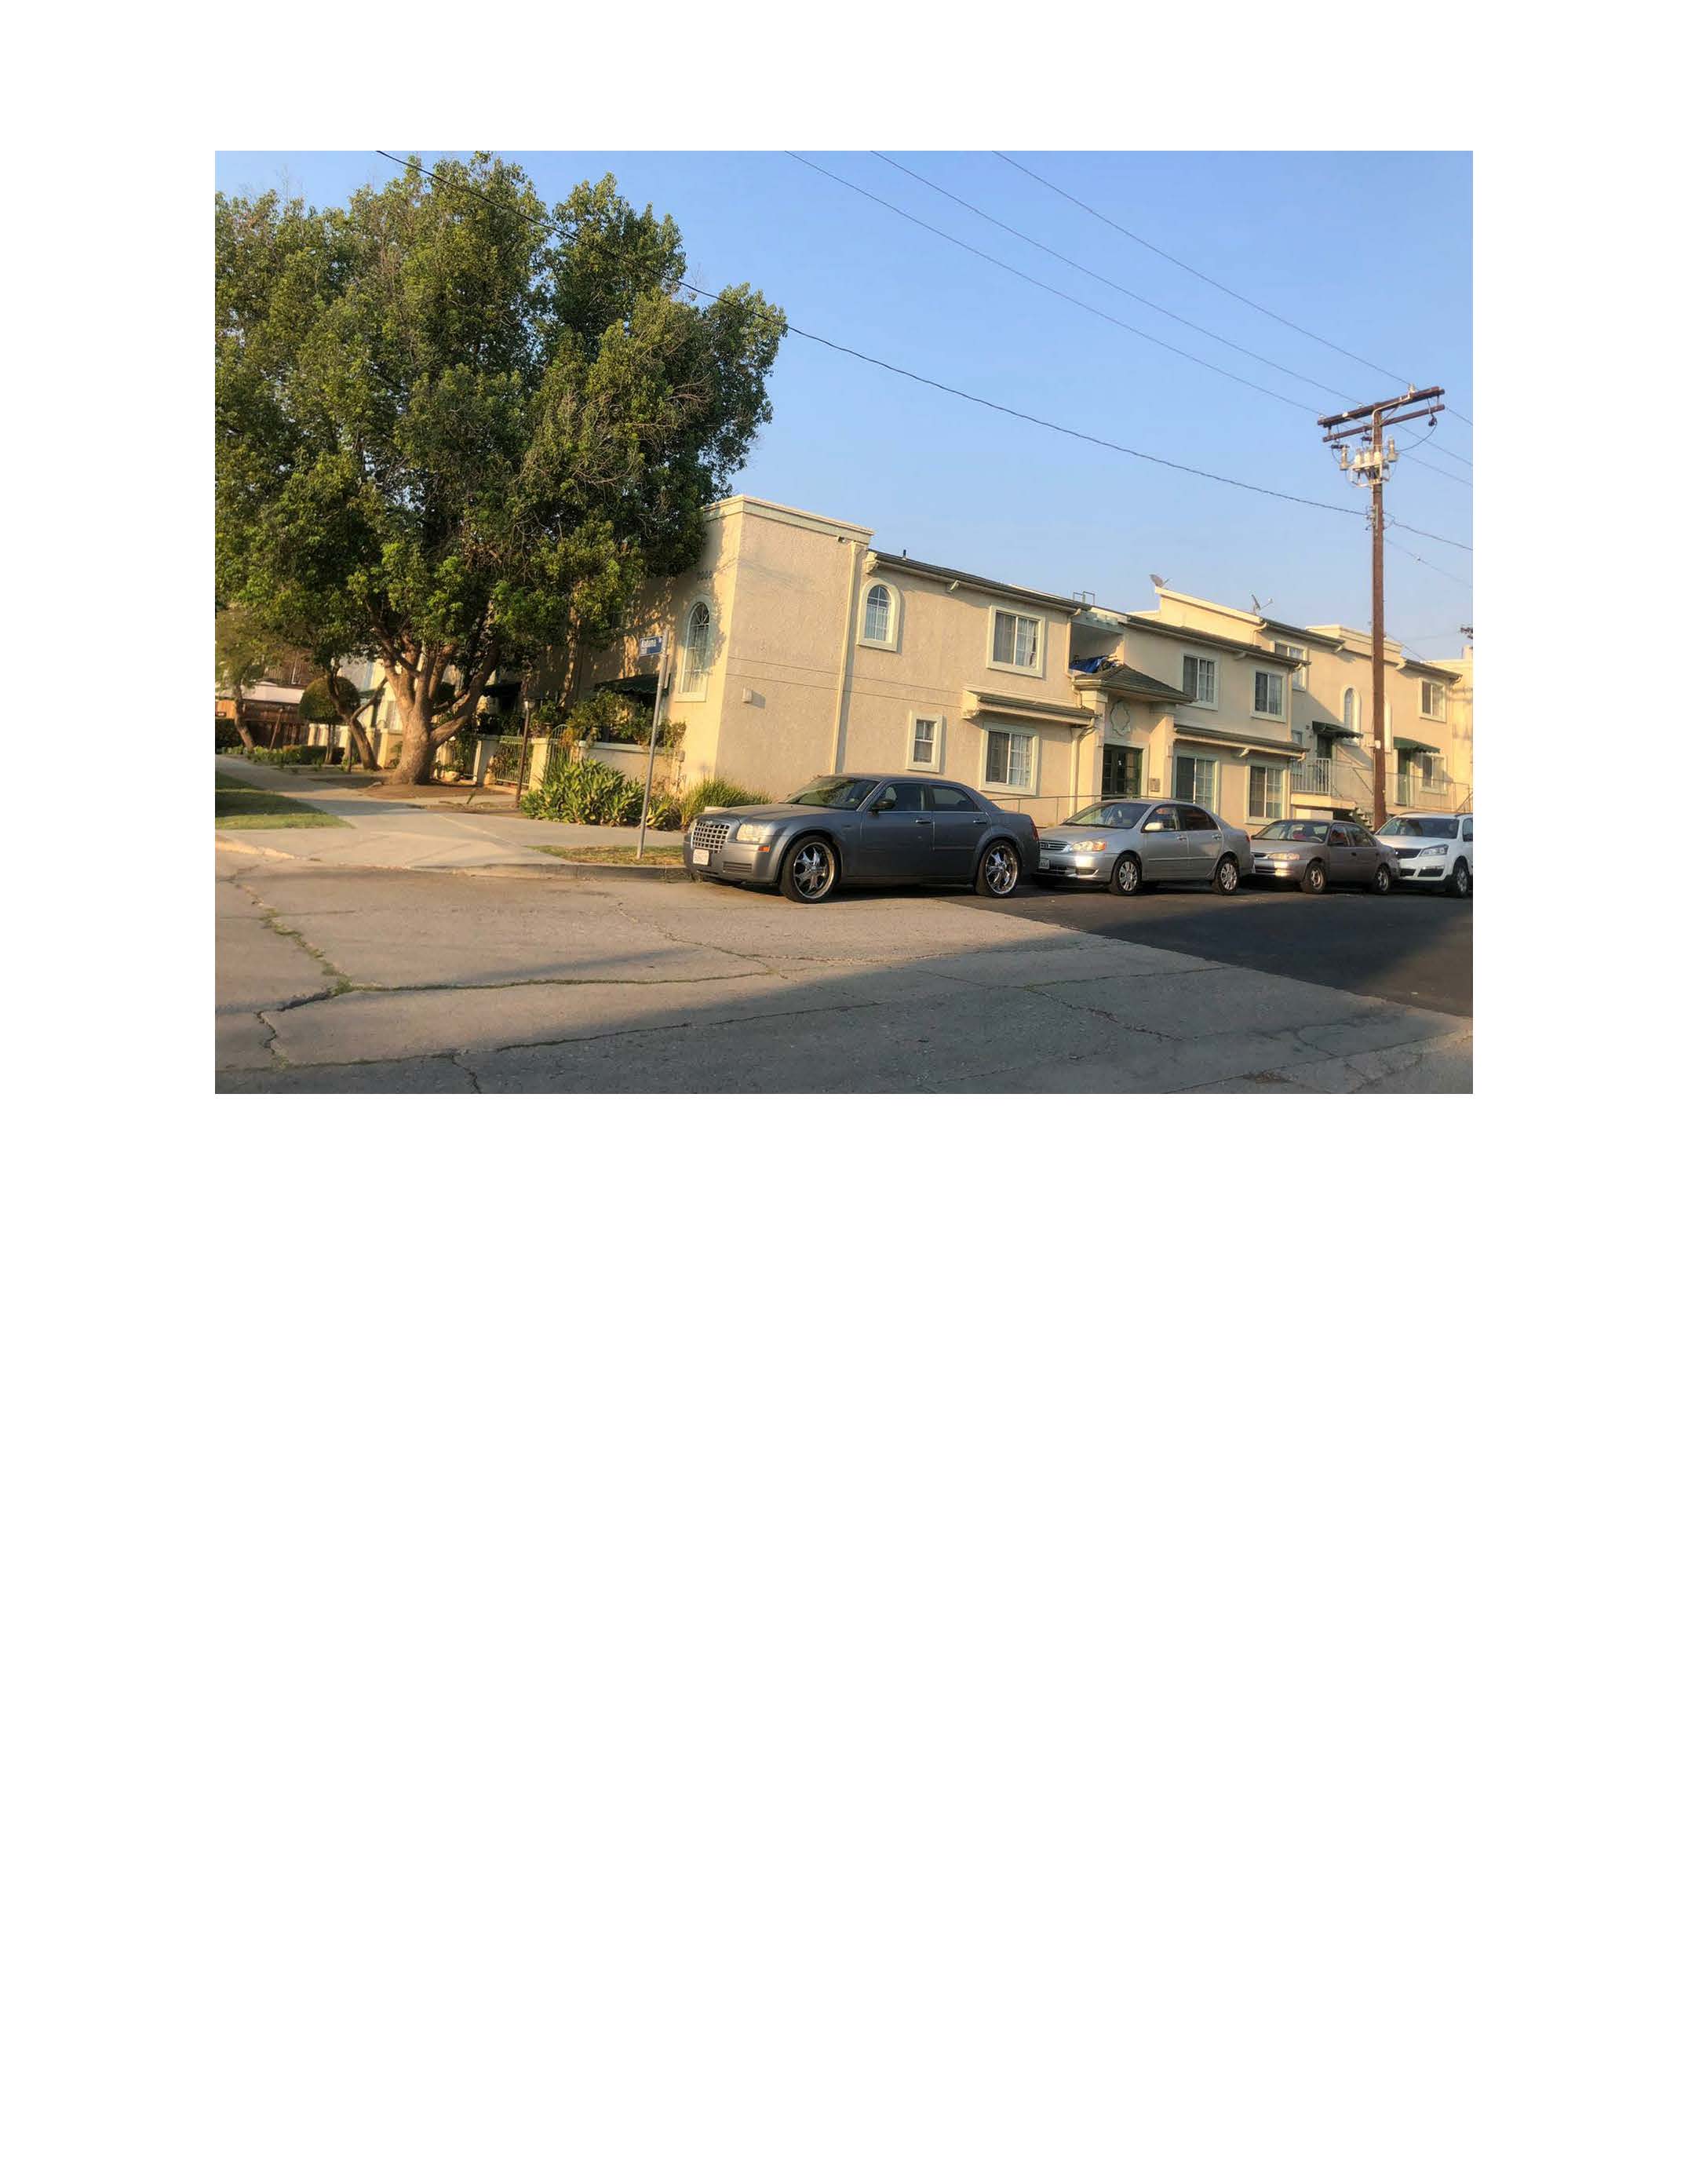 Photo of Street view of a one story apartment building, with cars parked on the side of the road.